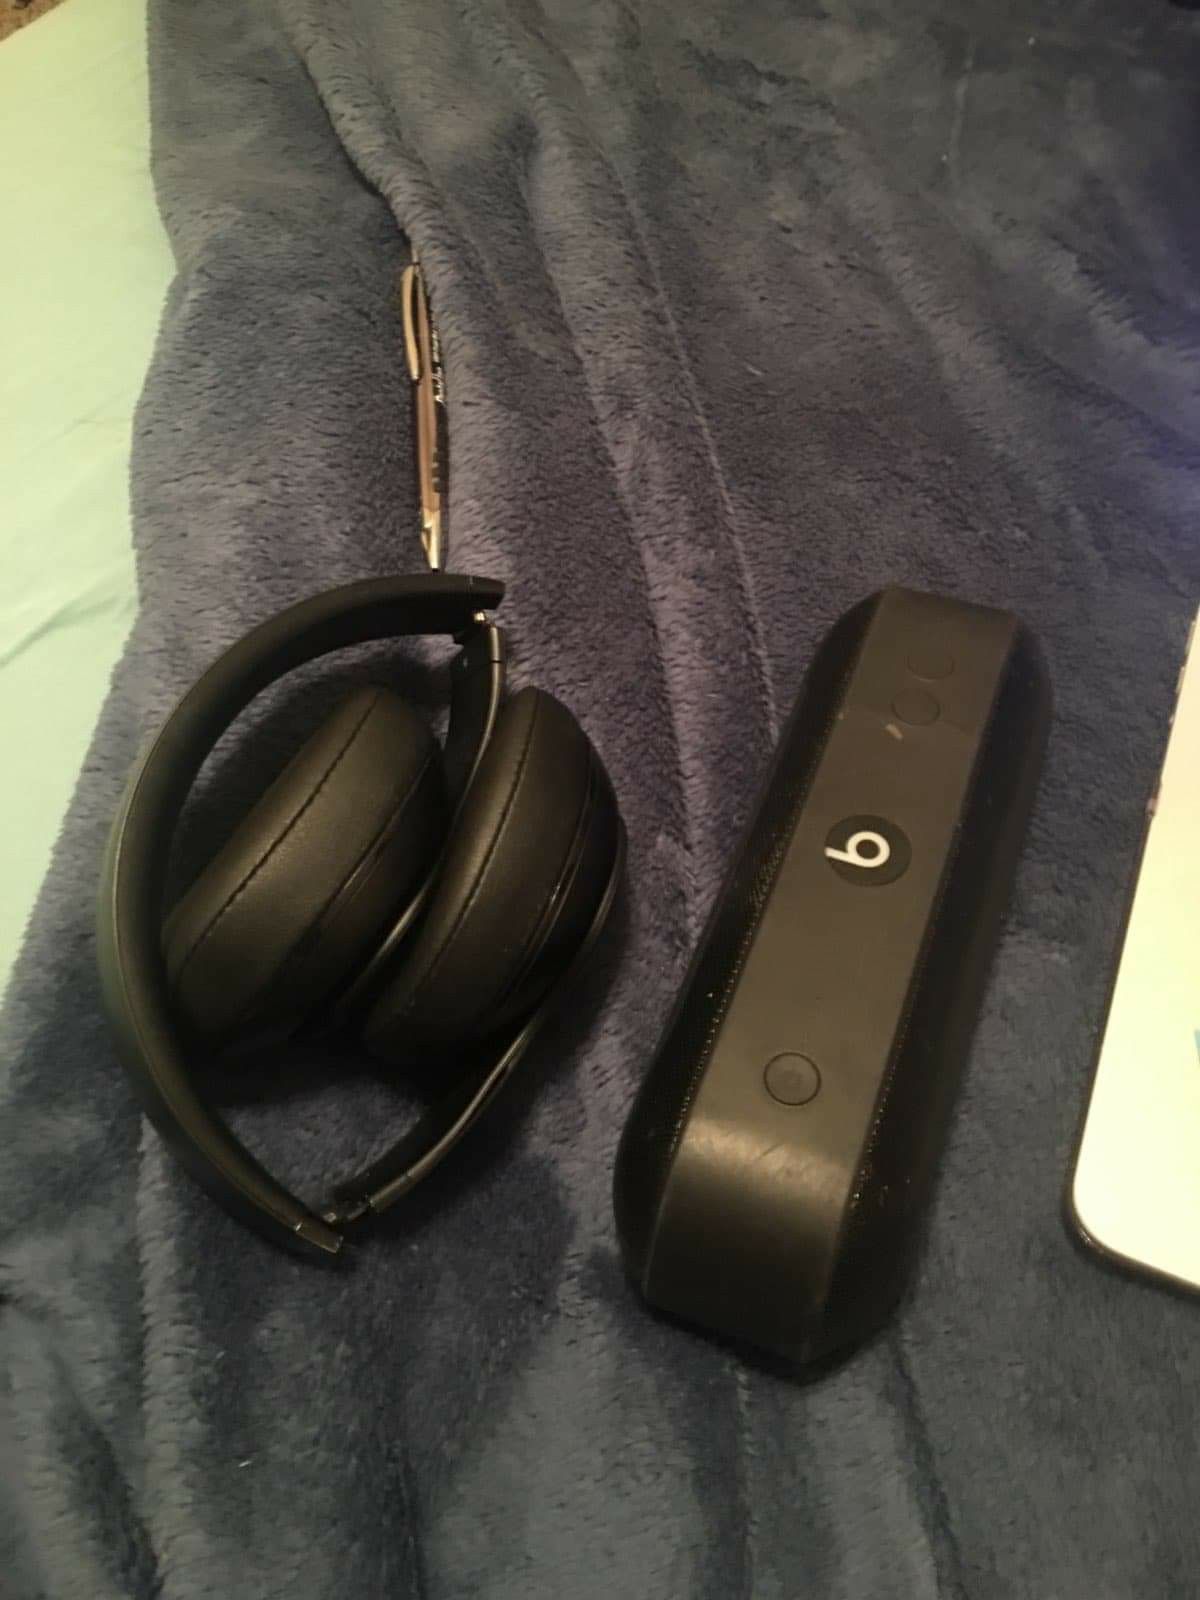 Mac book pro and wireless studio beats and a beats pill. Taking best offer price is not set